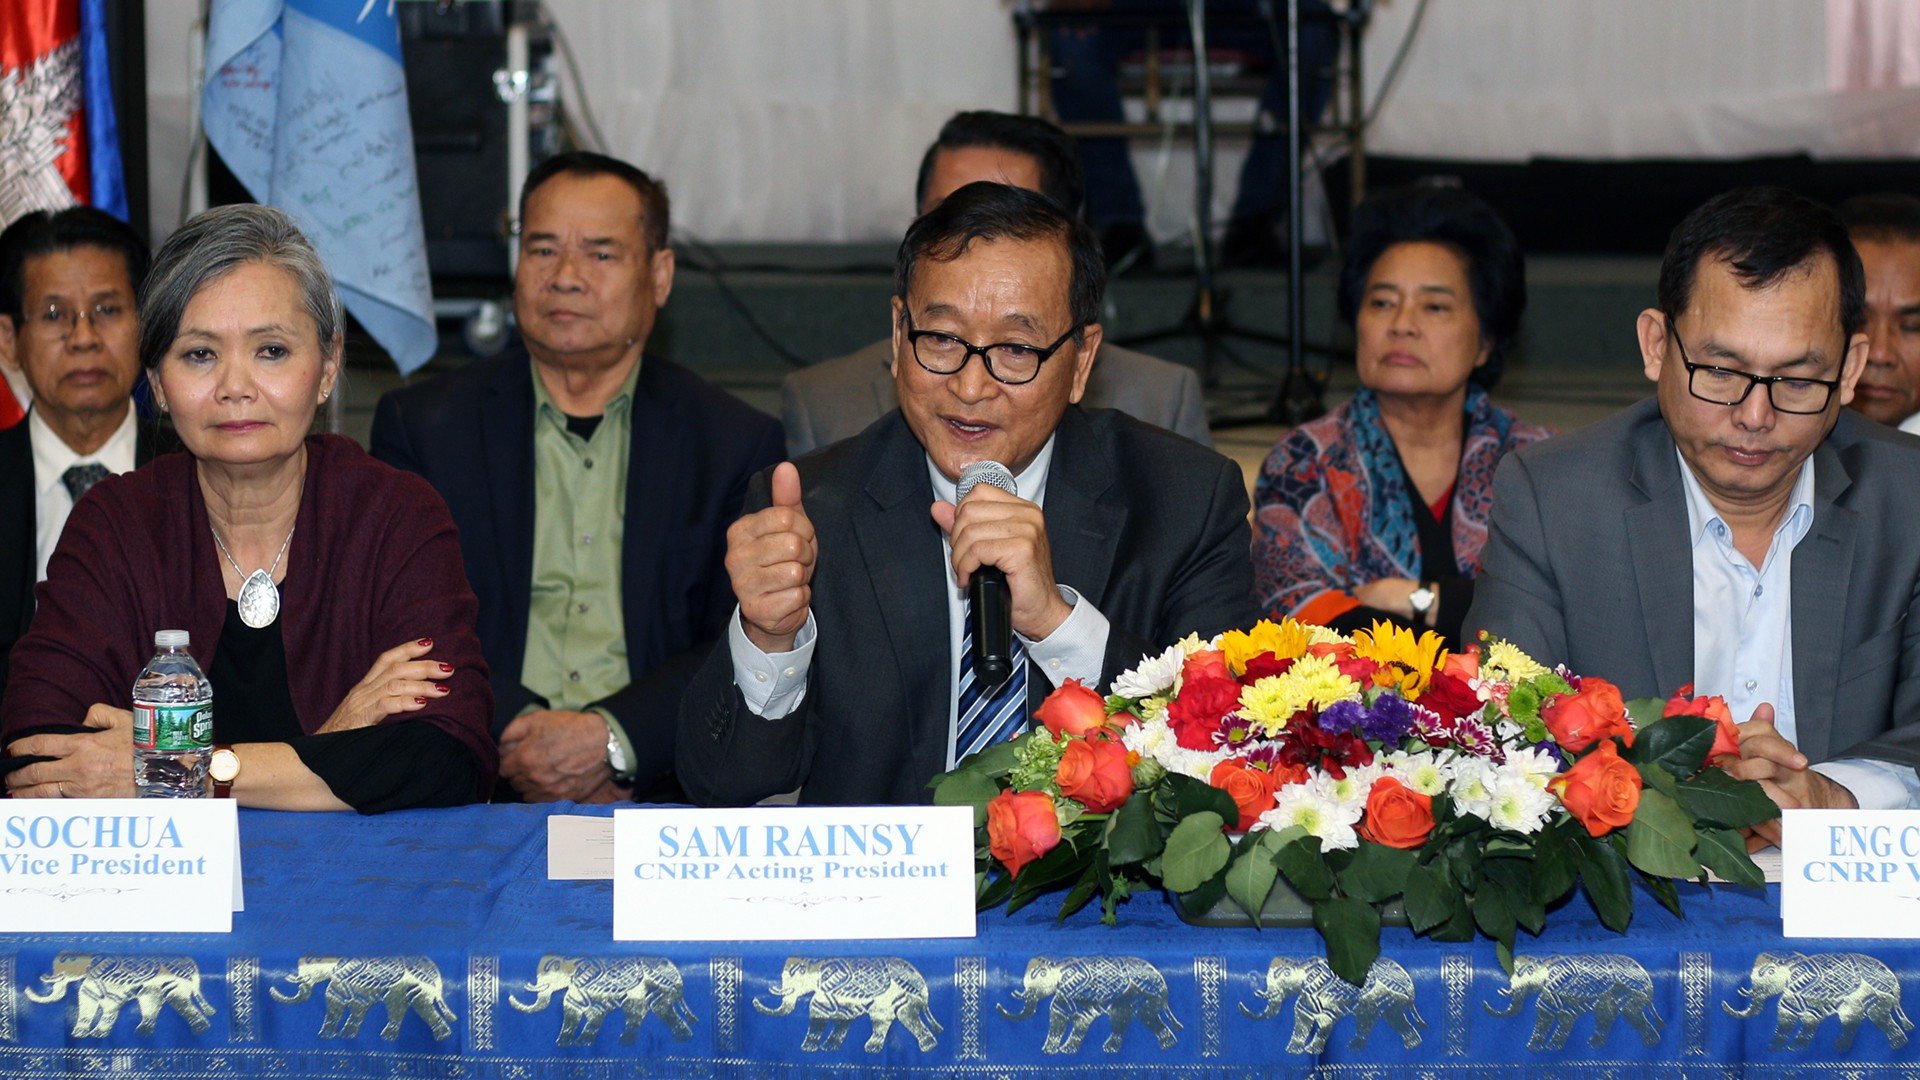 Sam Rainsy (C), Mu Sochua (L), and Eng Chhay Eang (R) speak to reporters during a press conference in the U.S., March 17, 2019.